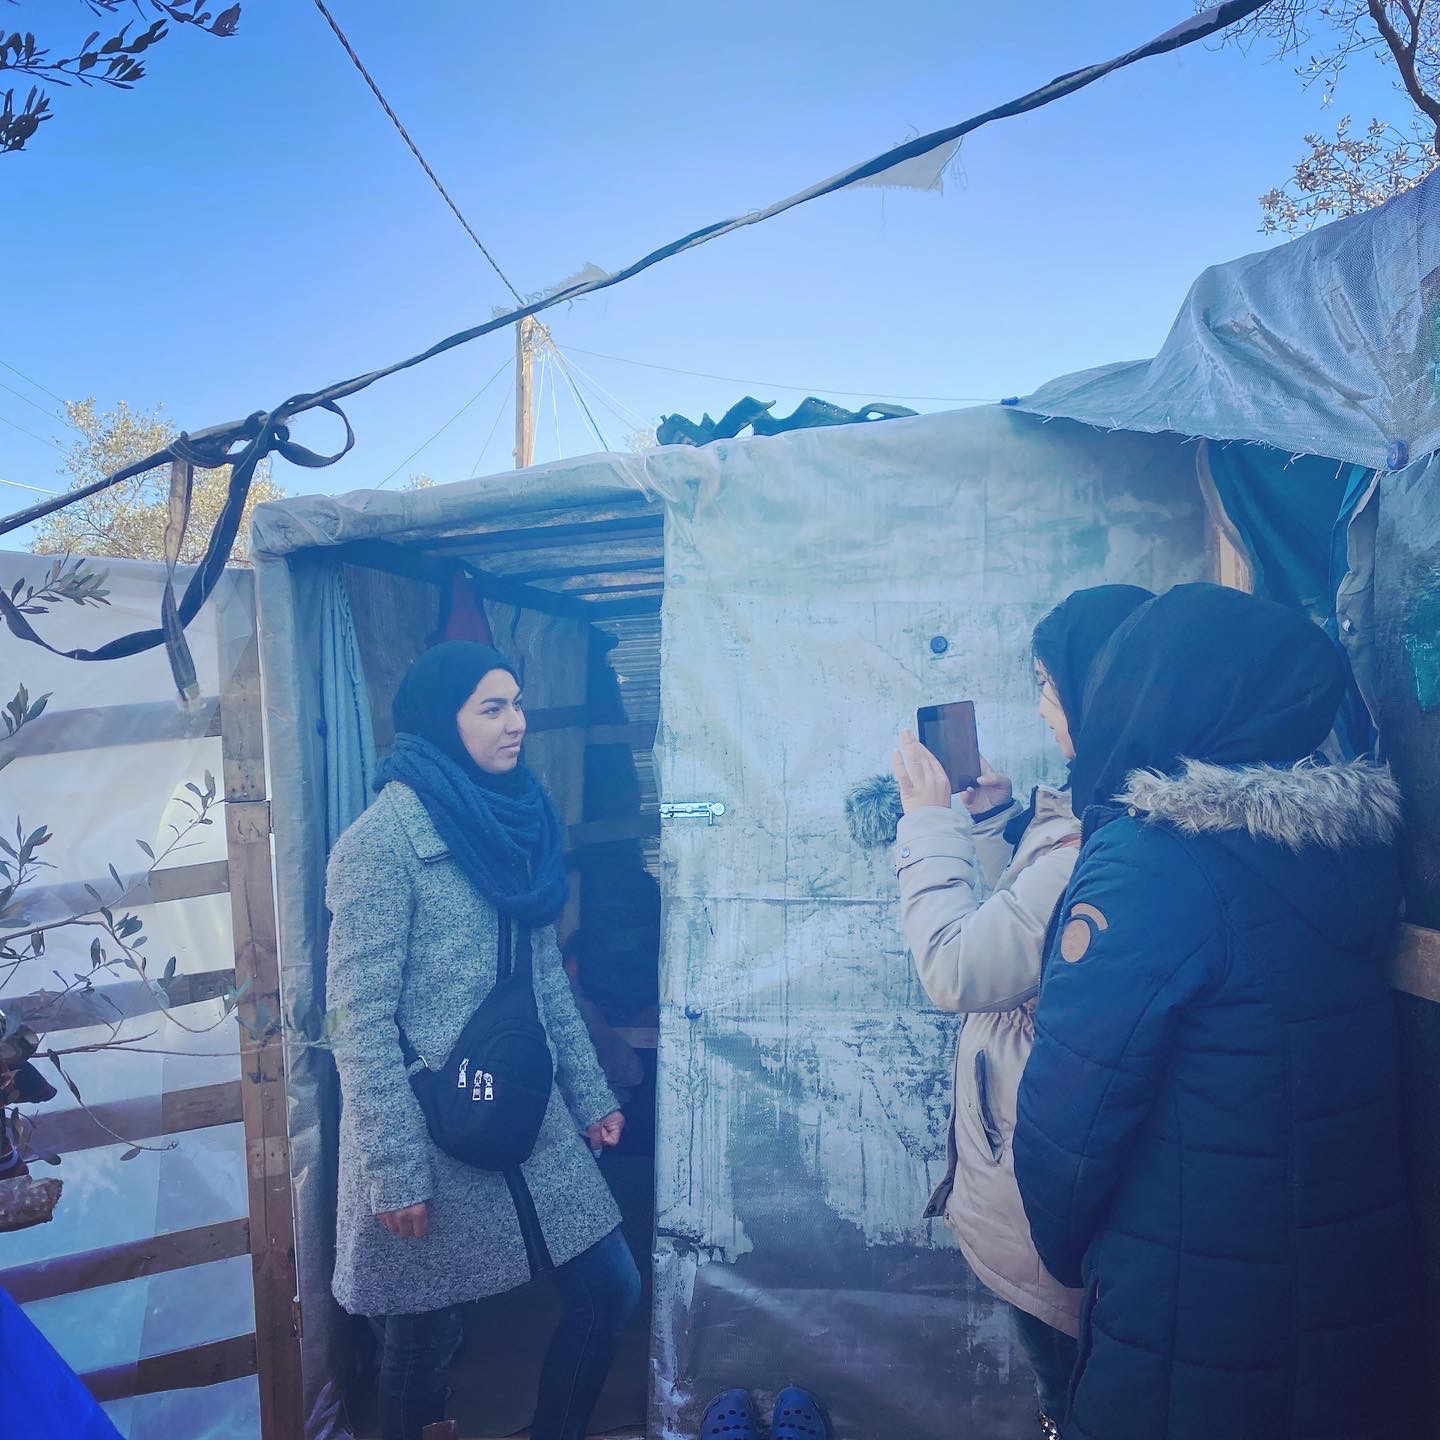 Celebrating Refugee Women of the Moria Camp and their Resilience #IWD2020